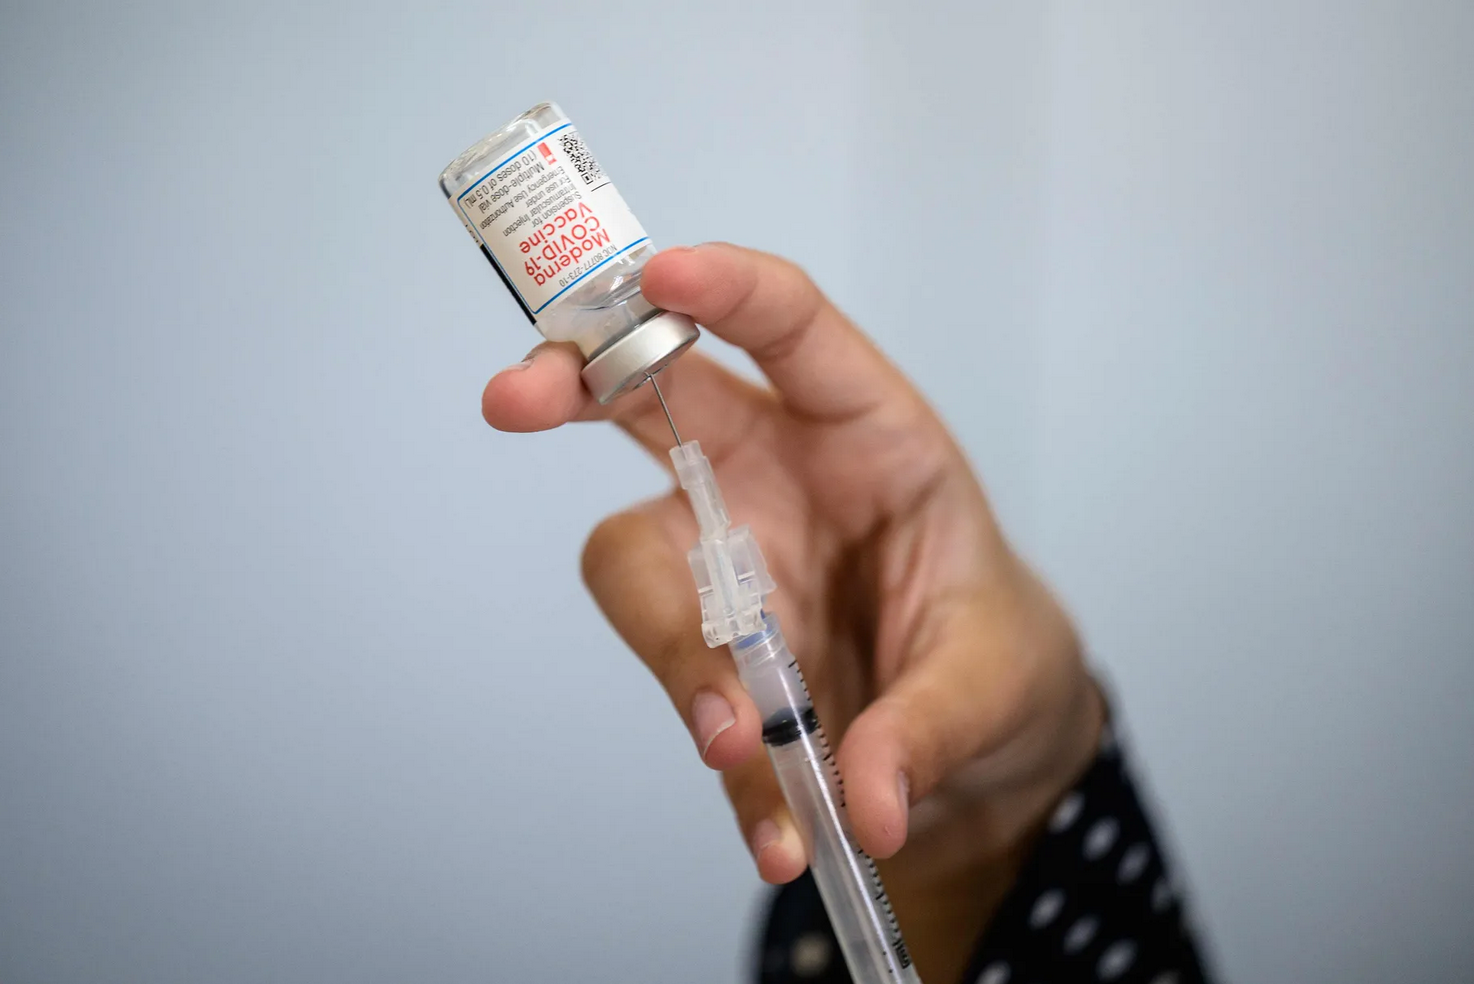 Fears, misinformation still fueling vaccine hesitancy in Illinois, new data shows